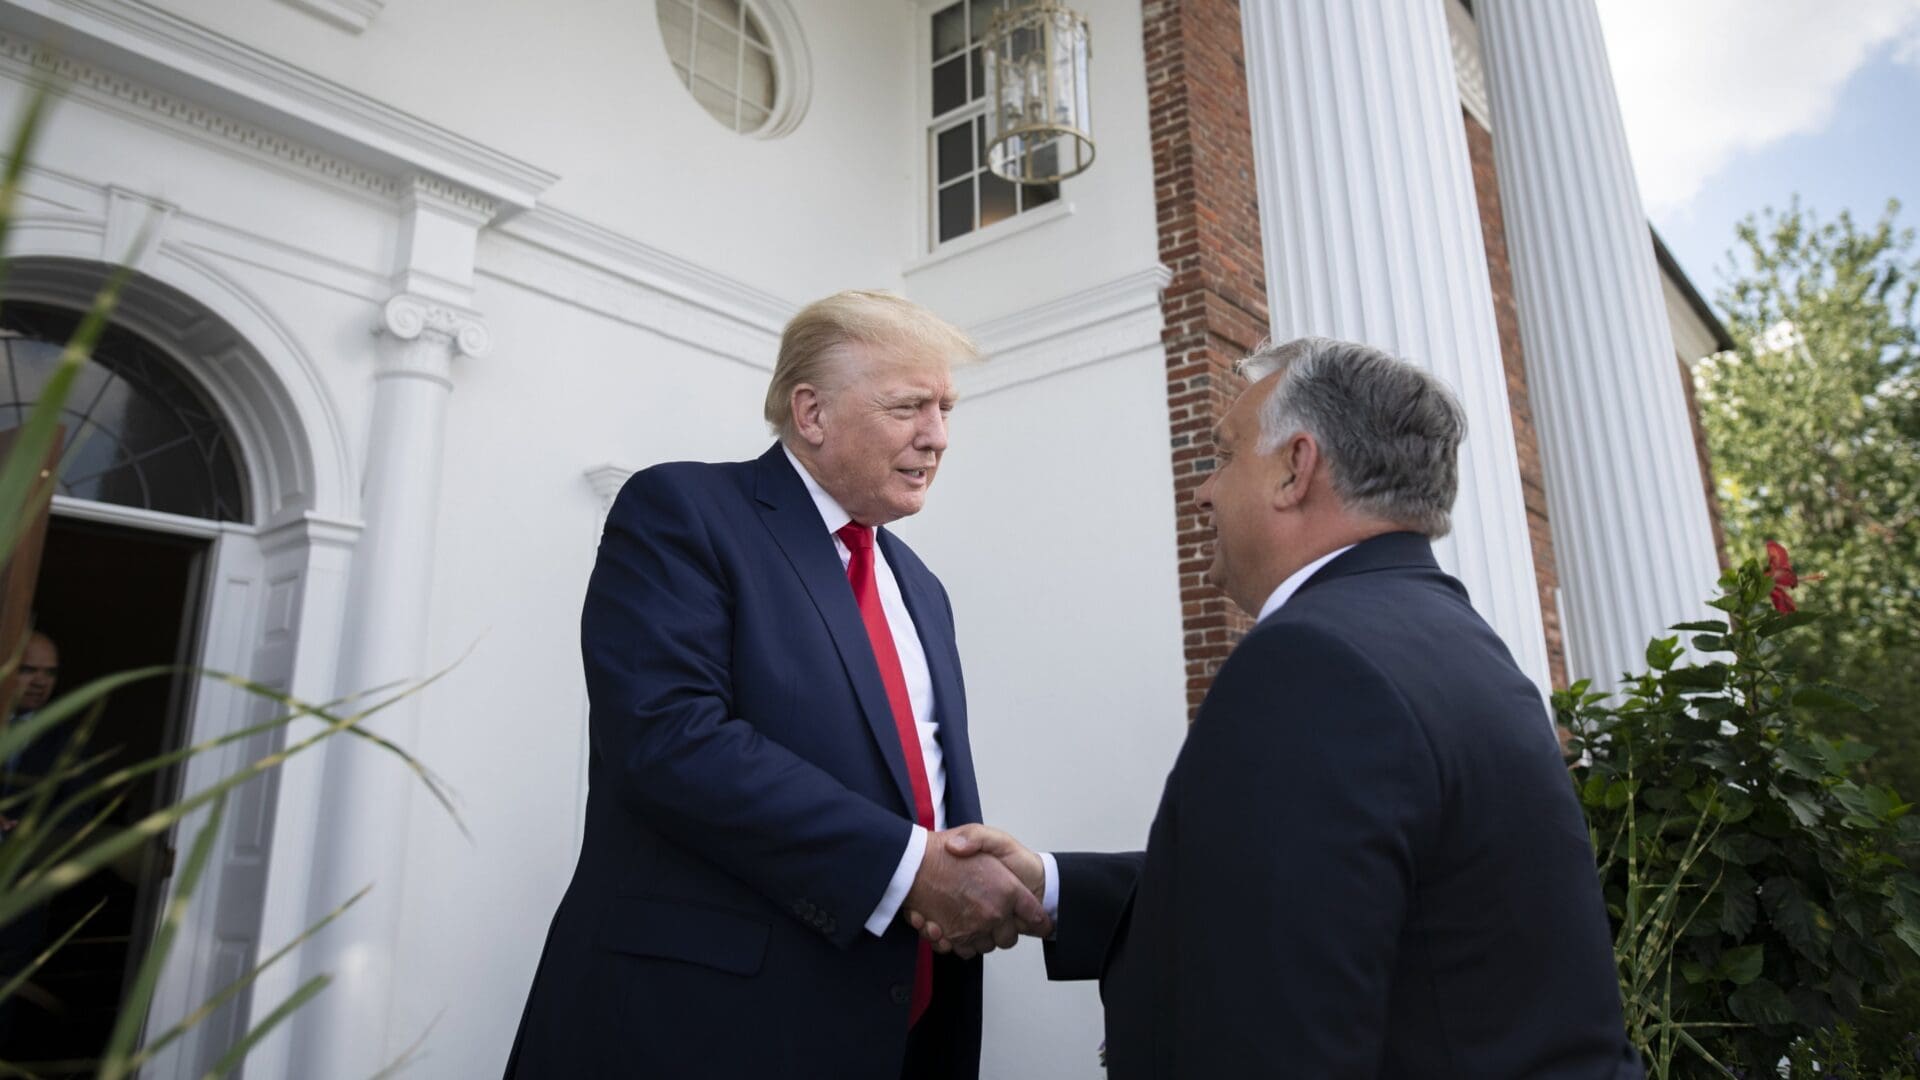 Donald Trump welcomes Viktor Orbán at his Bedminster, NJ estate on 2 August 2022.